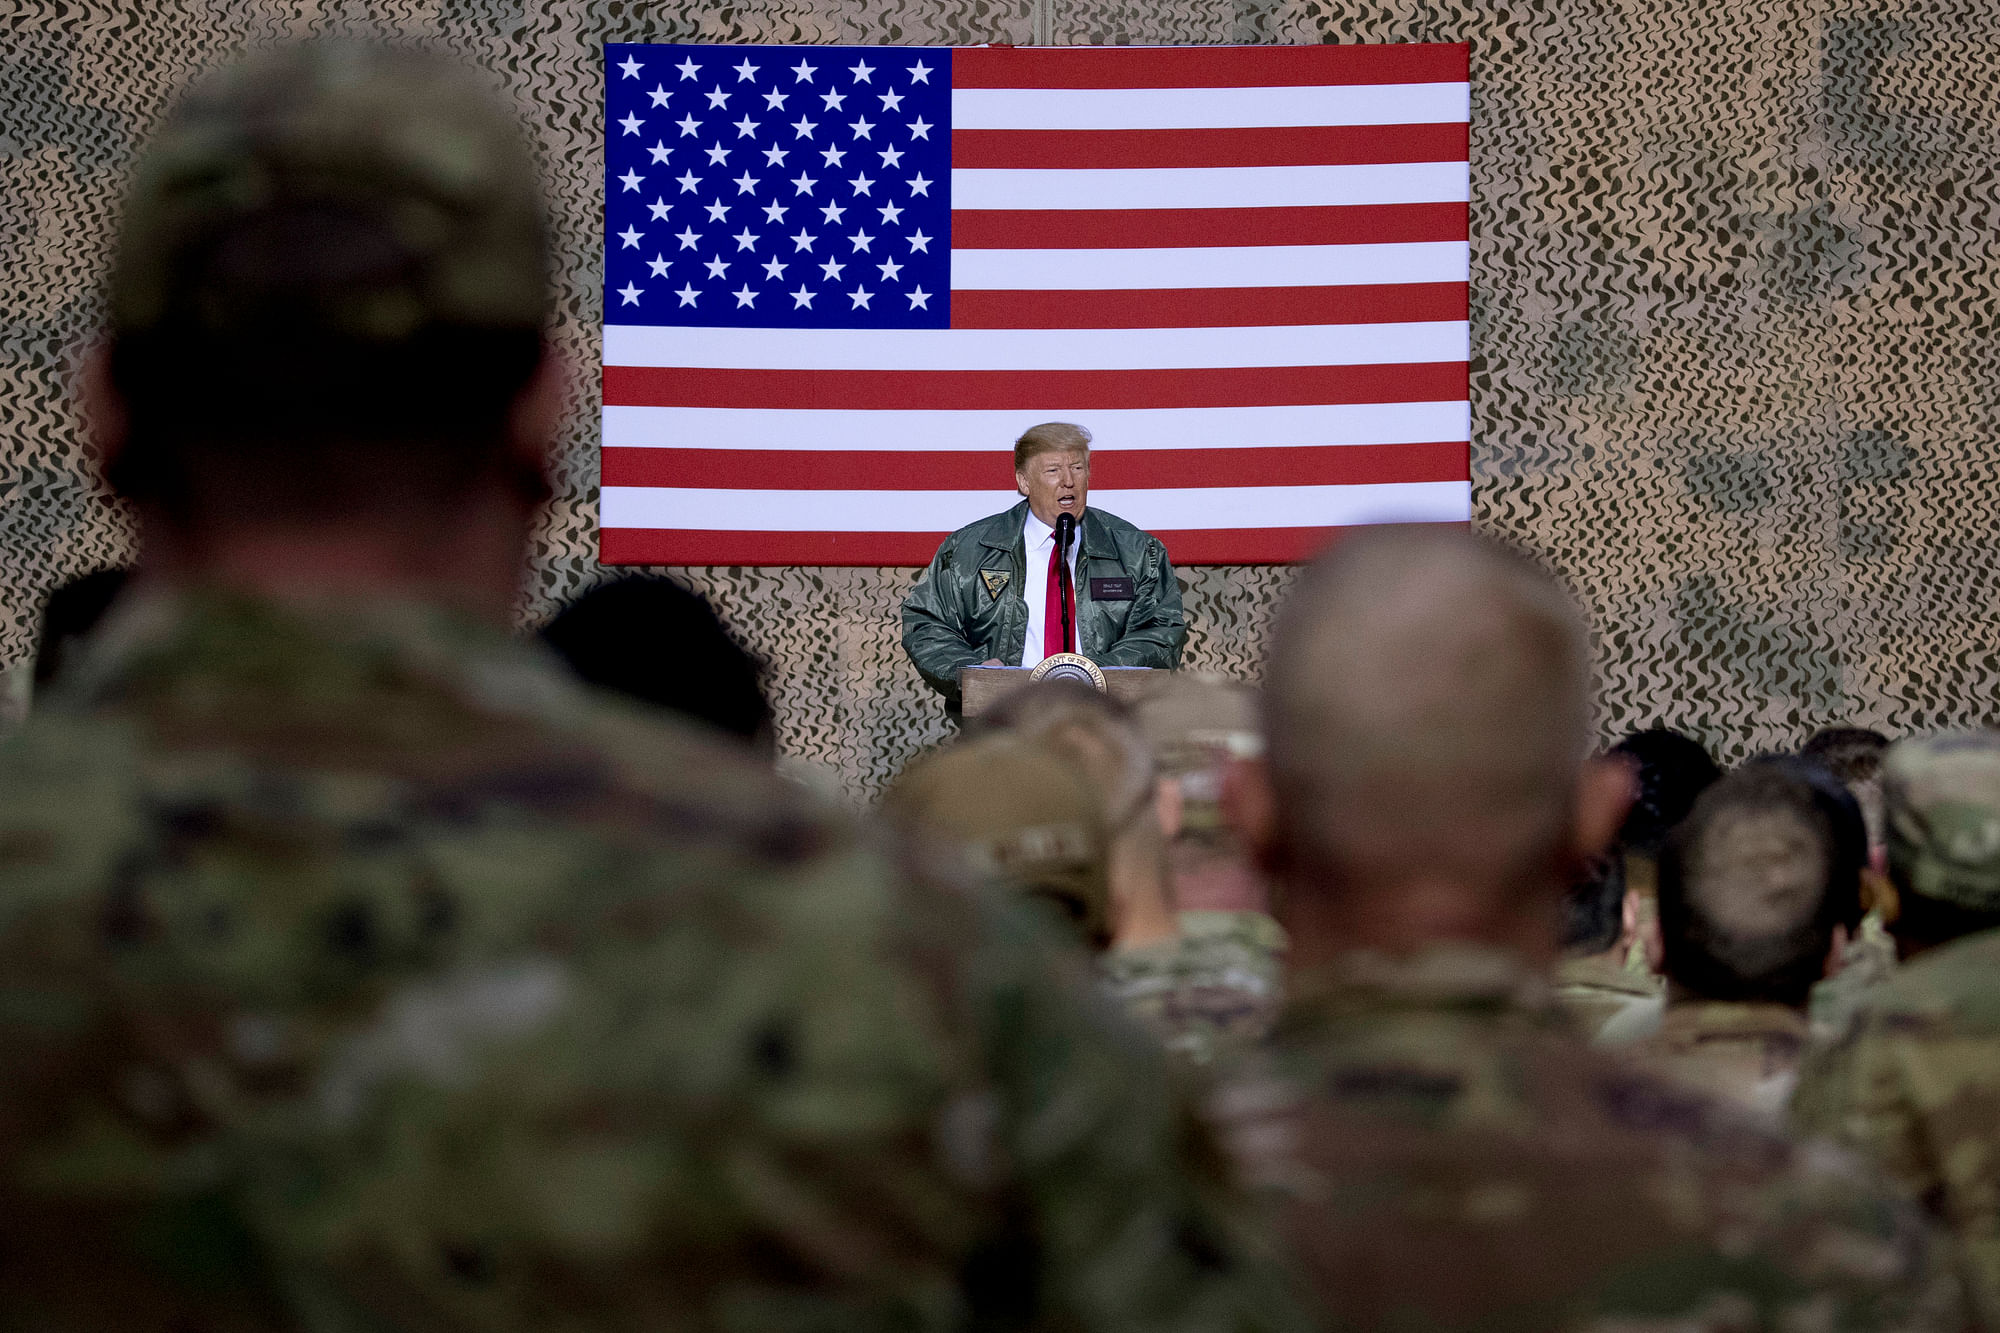 In this 26 December 2018, file photo, President Donald Trump speaks to members of the military at a hangar rally at Al Asad Air Base, Iraq.